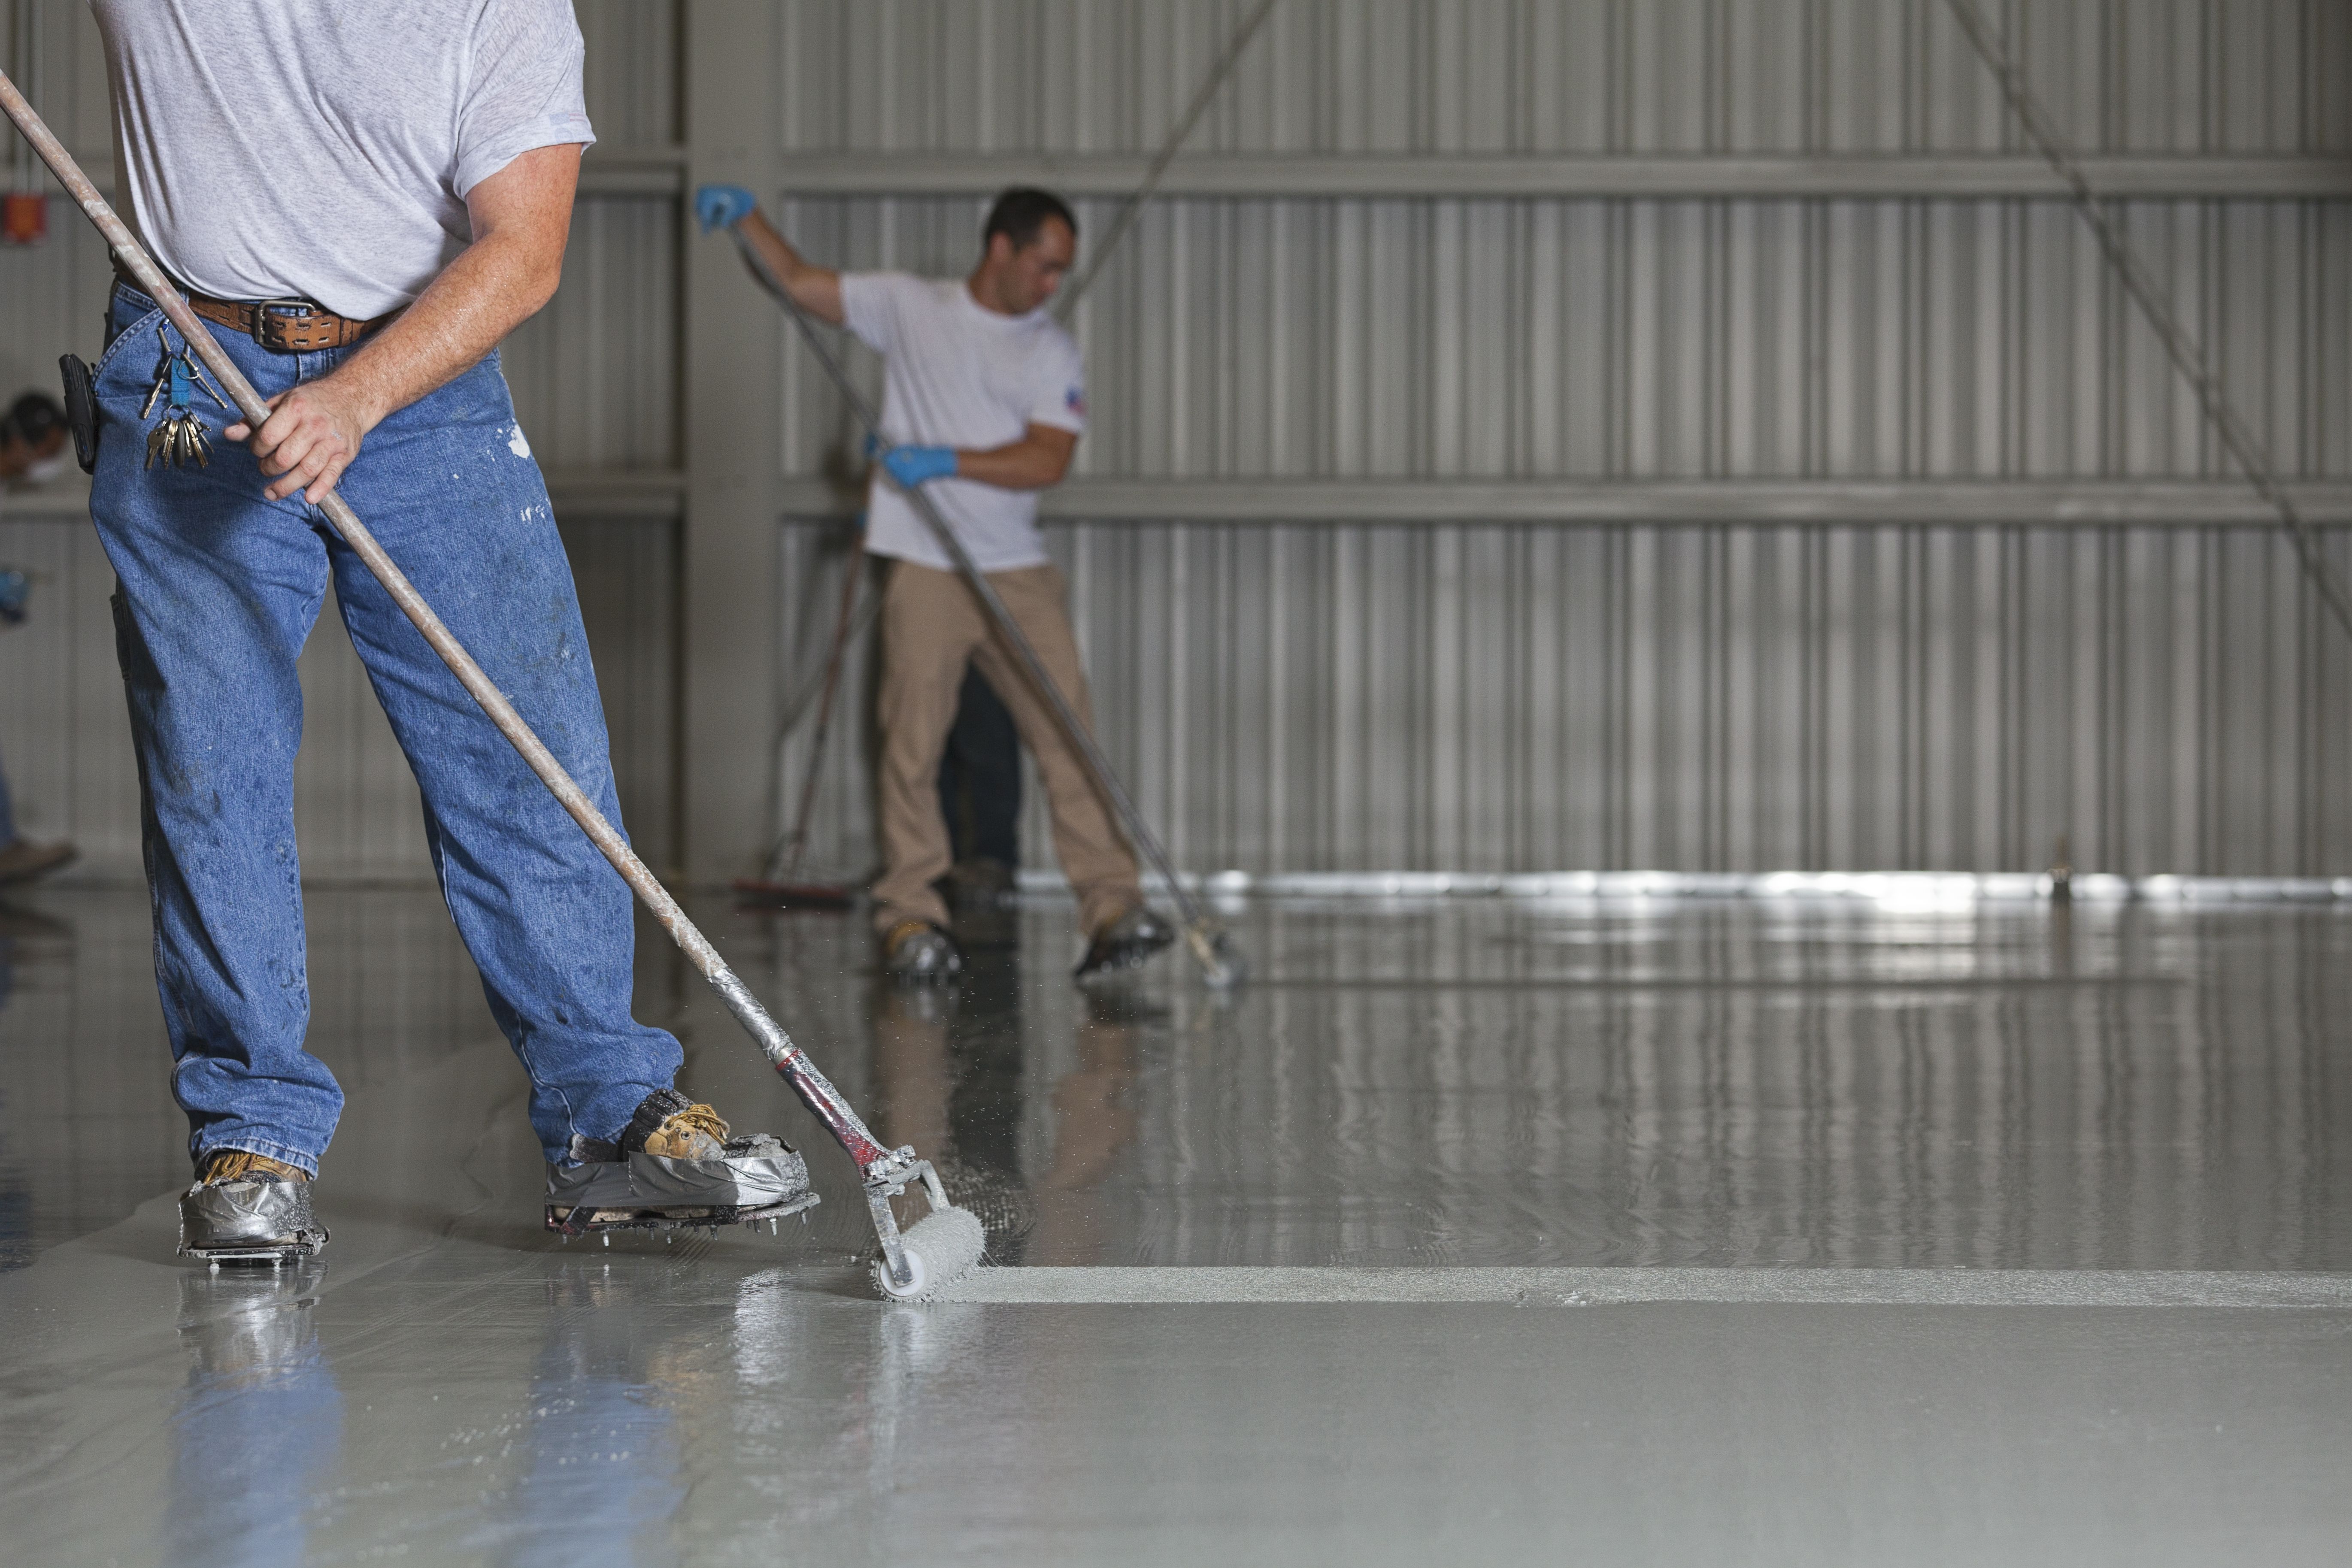 coating being applied to commercial floor